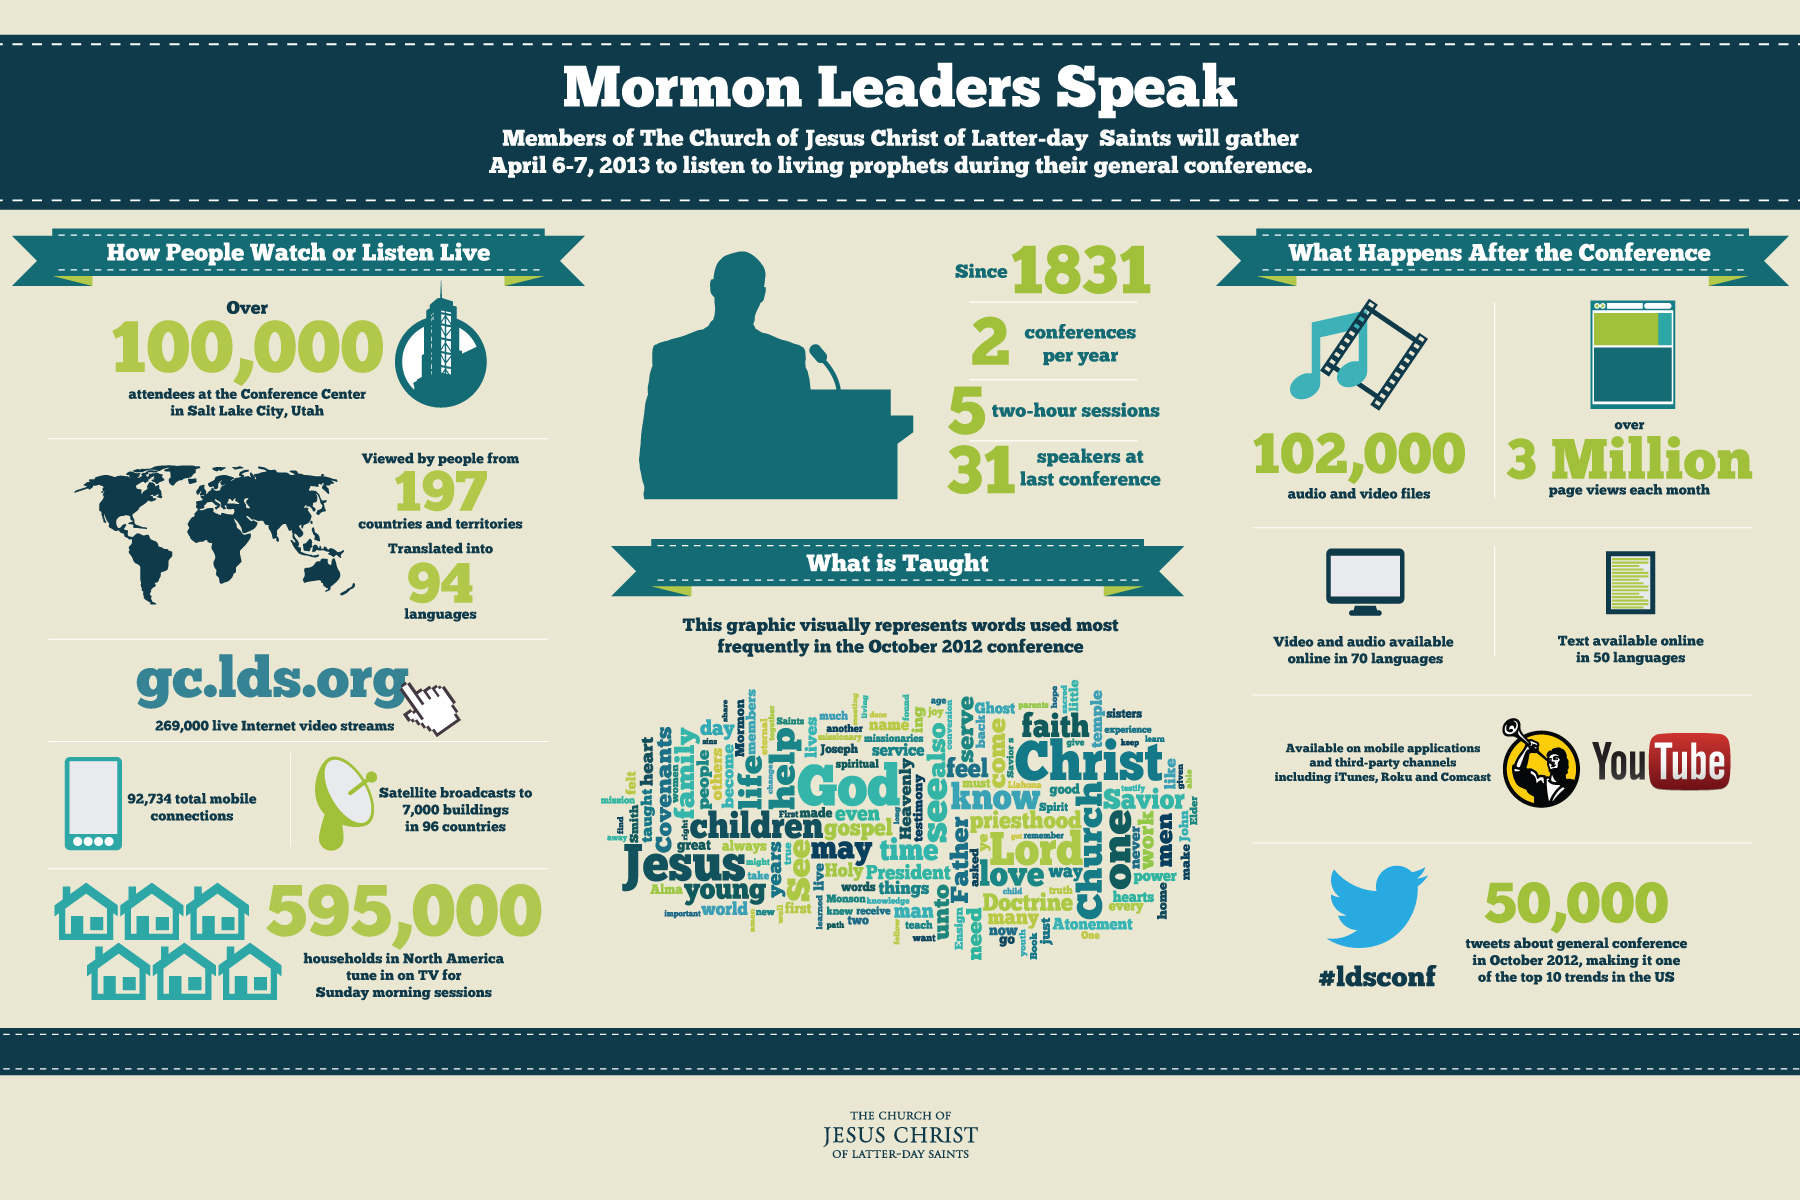 https://www.lds.org/bc/content/ldsorg/general-conference/images/LDS-Mormon-general-conference-info-graphic-apr-2013.jpg?lang=eng